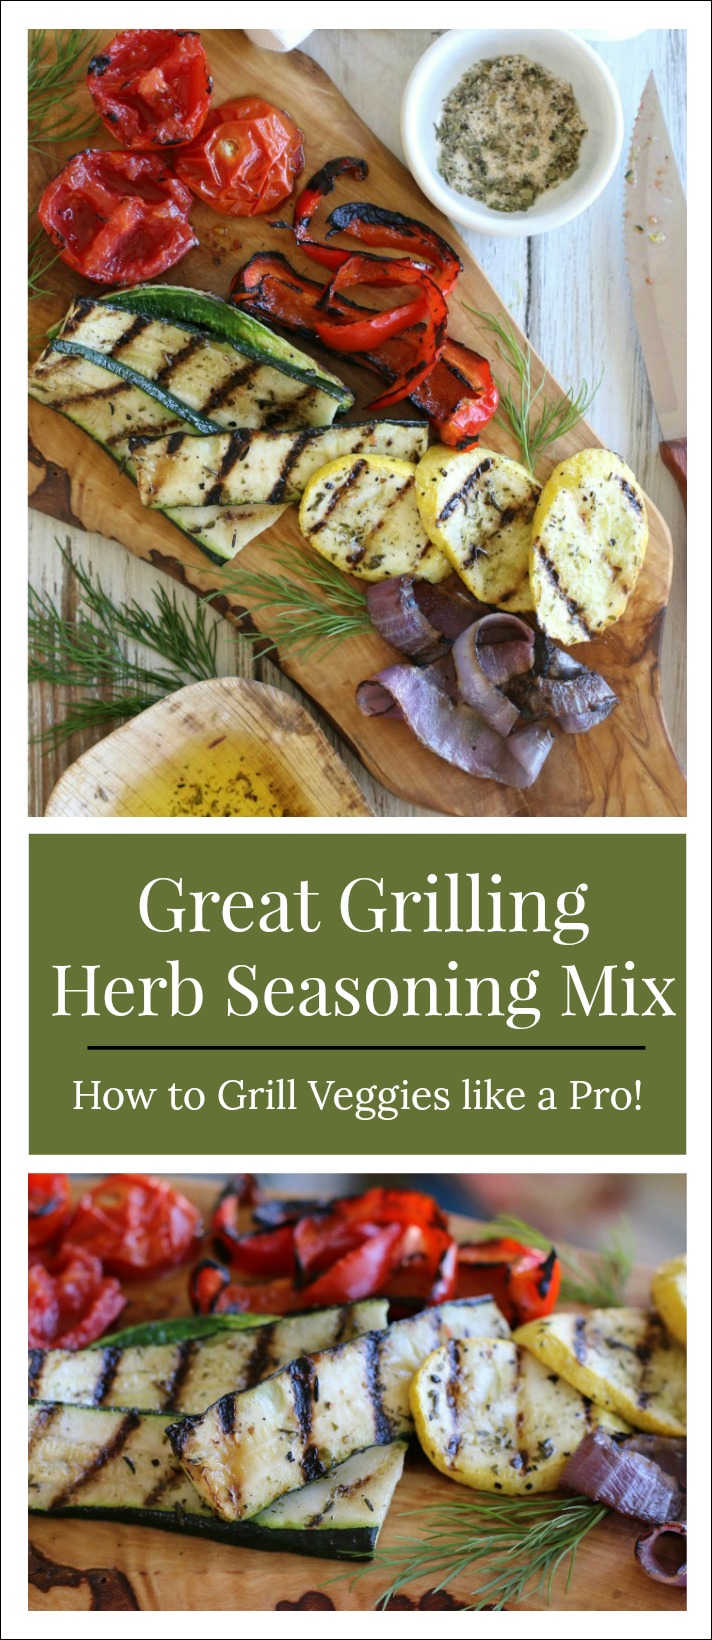 Turn nutritious veggies into quick and flavorful meals – just fire up the grill and learn how to season and grill veggies like a pro!